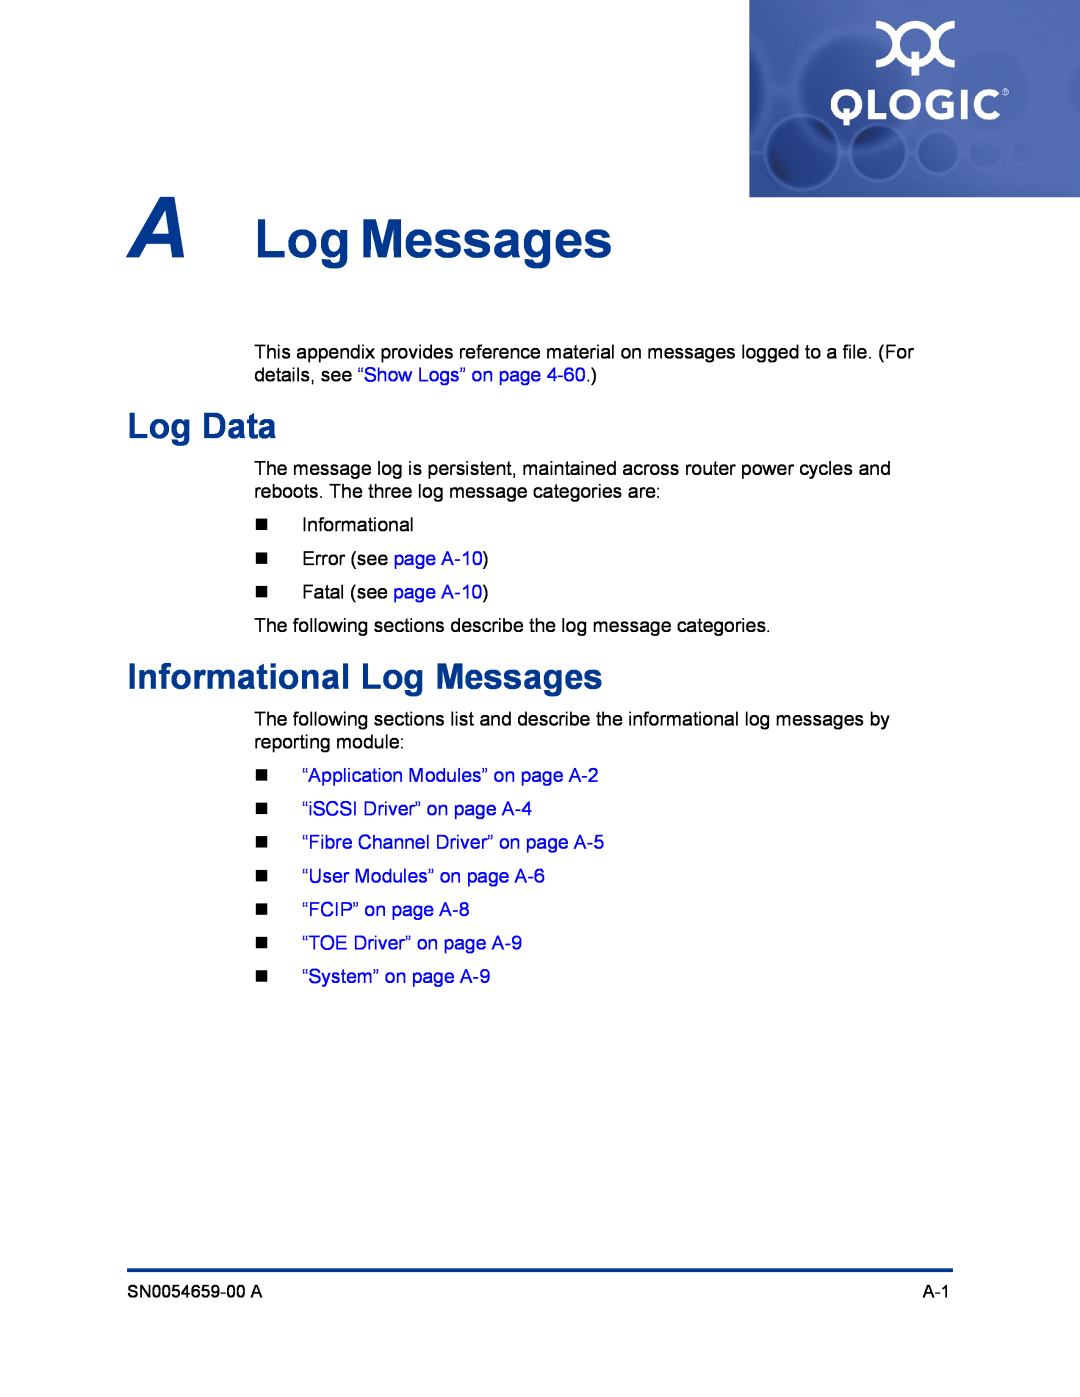 Q-Logic ISR6142 A Log Messages, Log Data, Informational Log Messages, „ “FCIP” on page A-8 „ “TOE Driver” on page A-9 